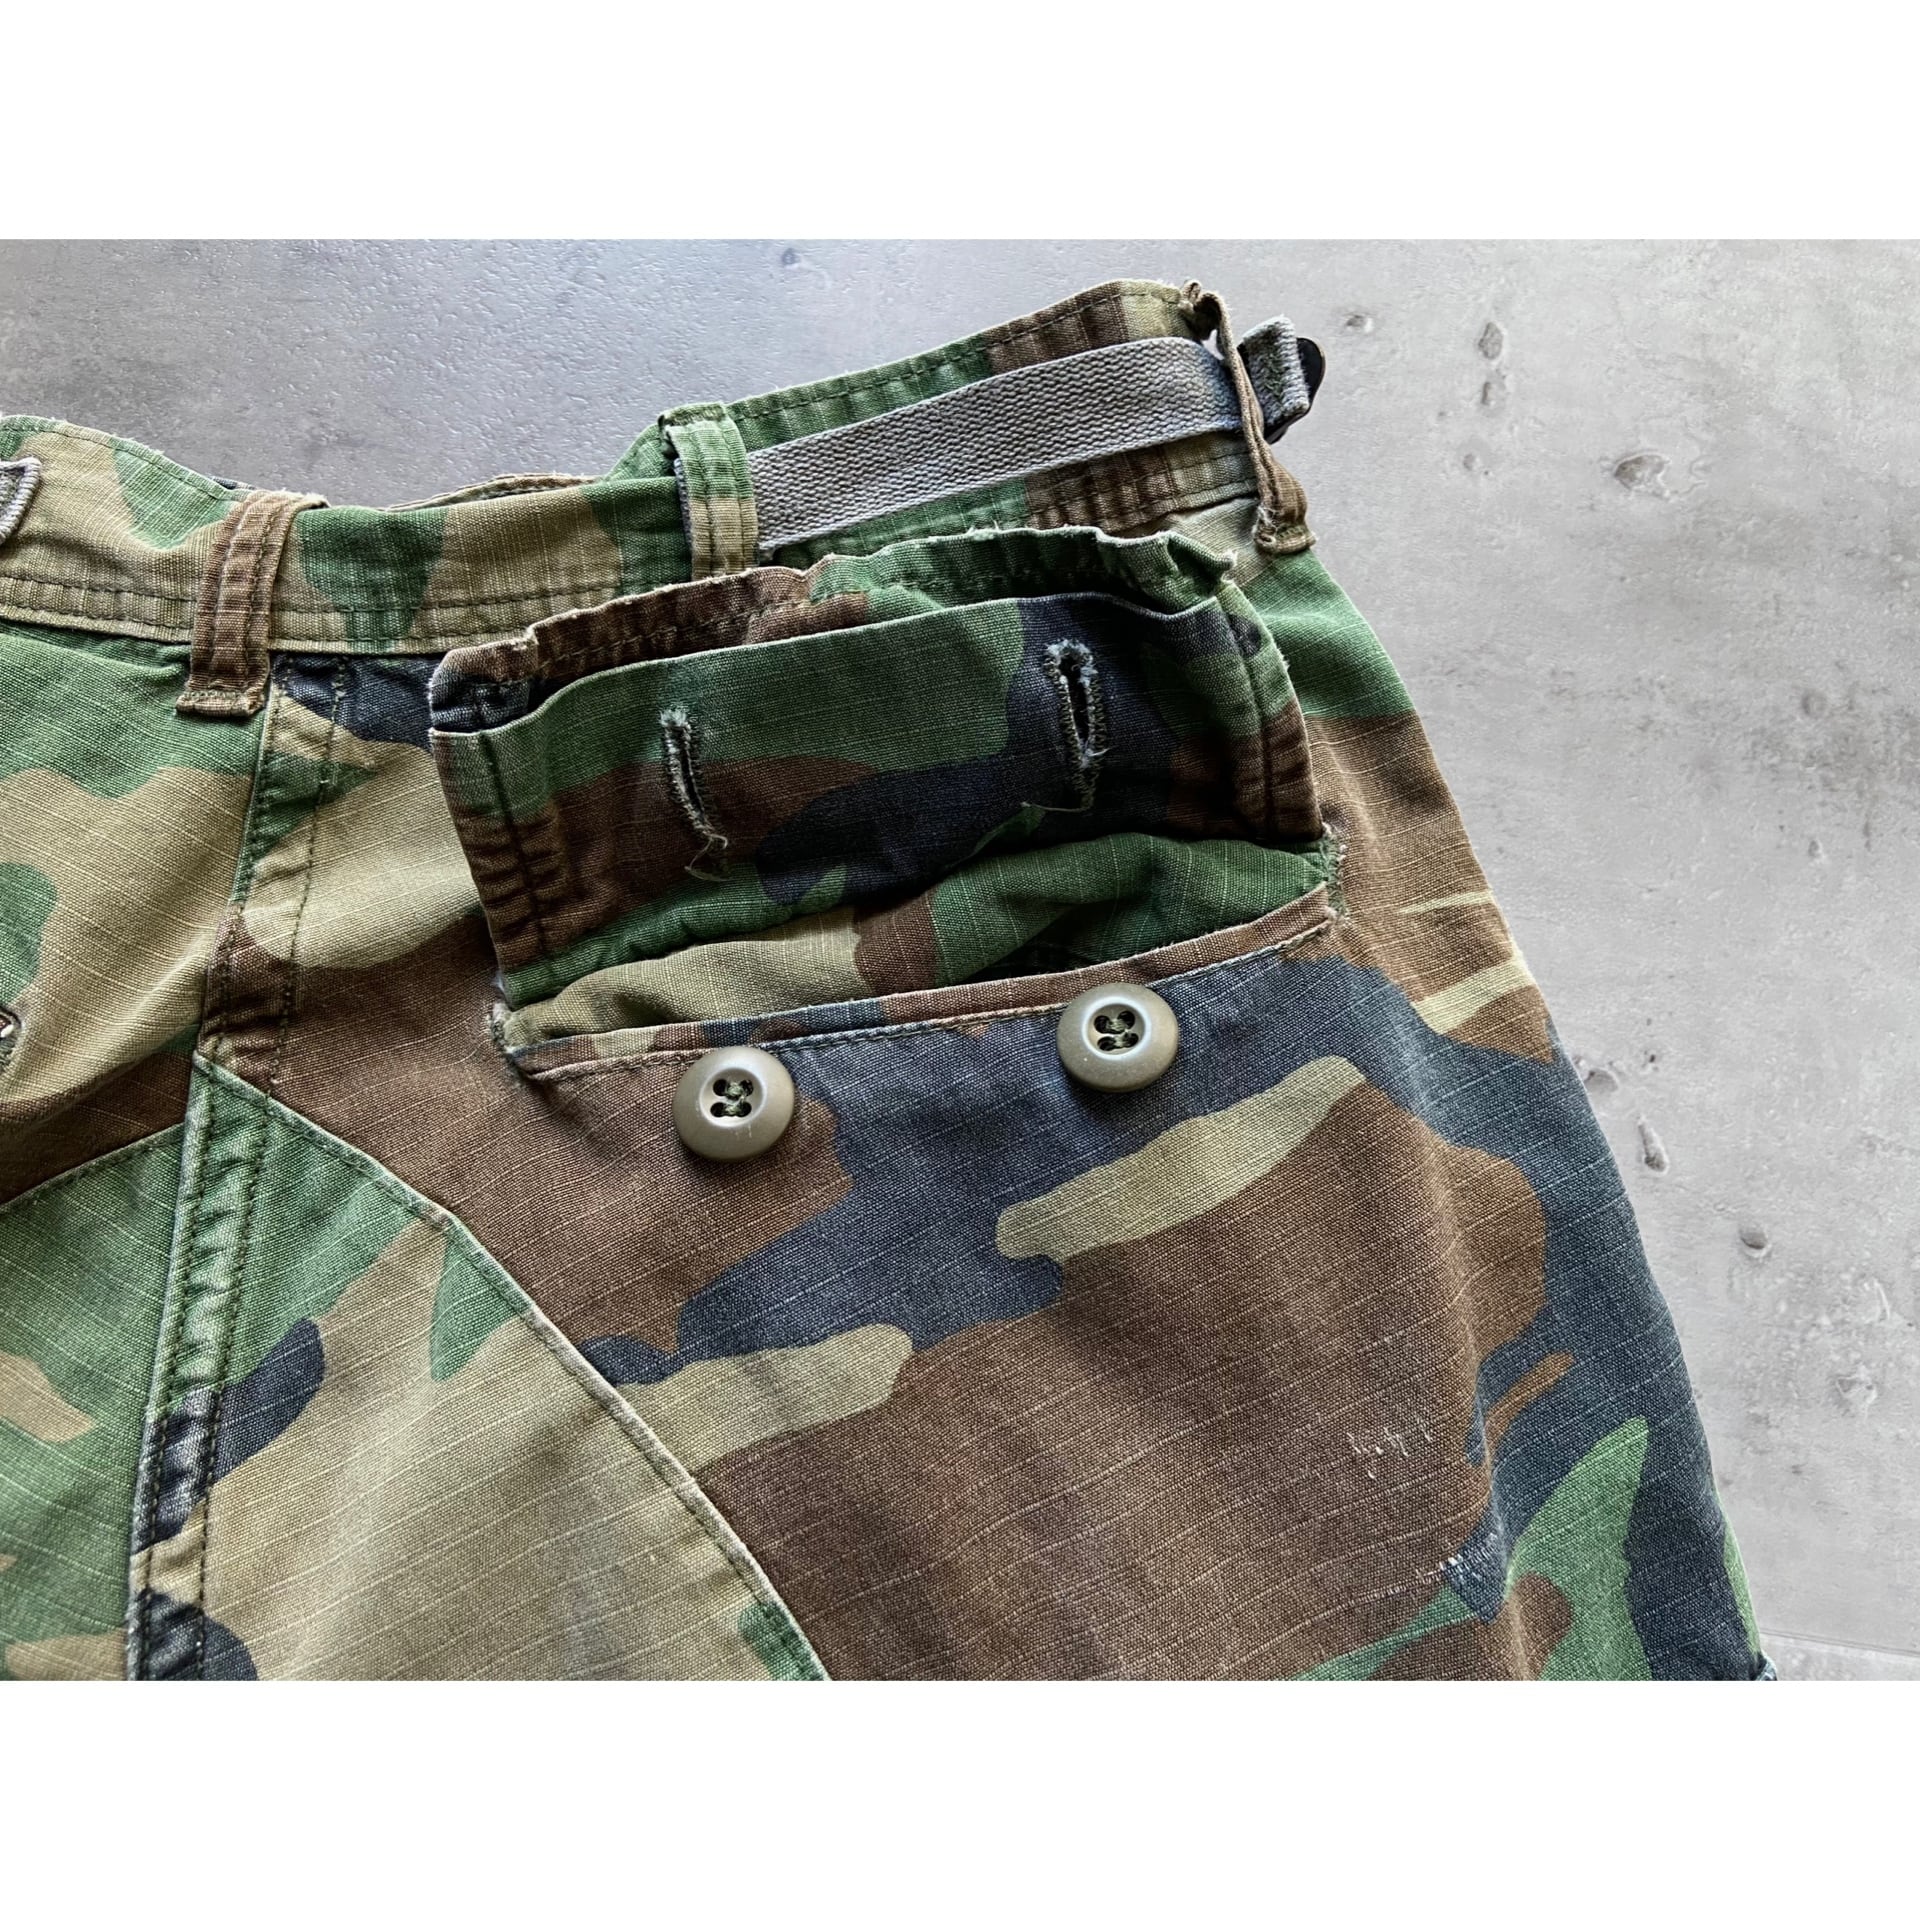 80s woodland camouflage pattern combat trousers “BDU” 米軍 ...